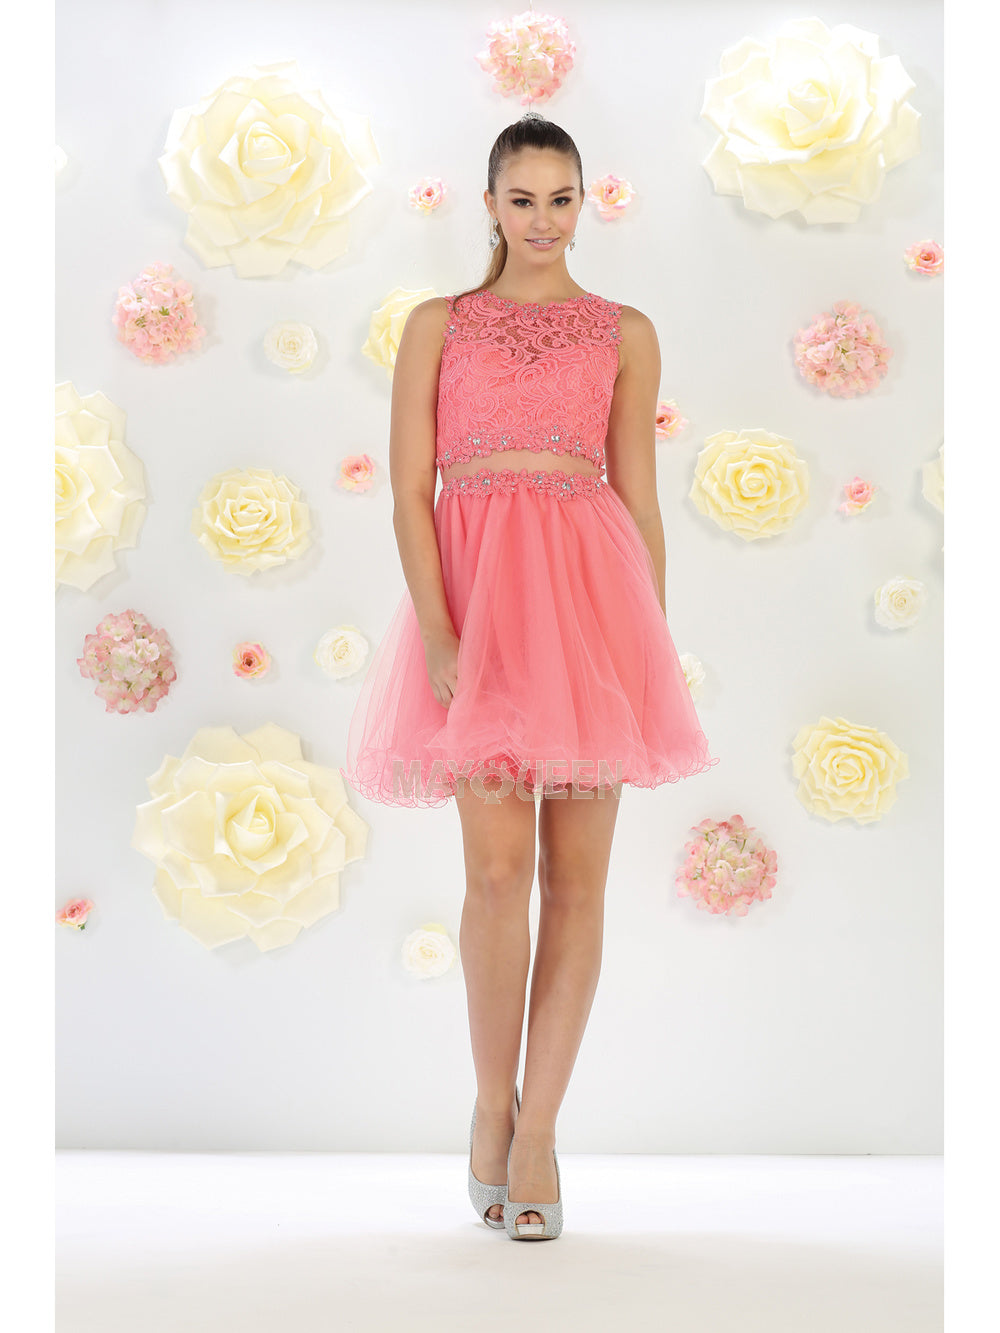 May Queen - MQ1268 Jewel Embroided Cocktail Dress In Pink and White